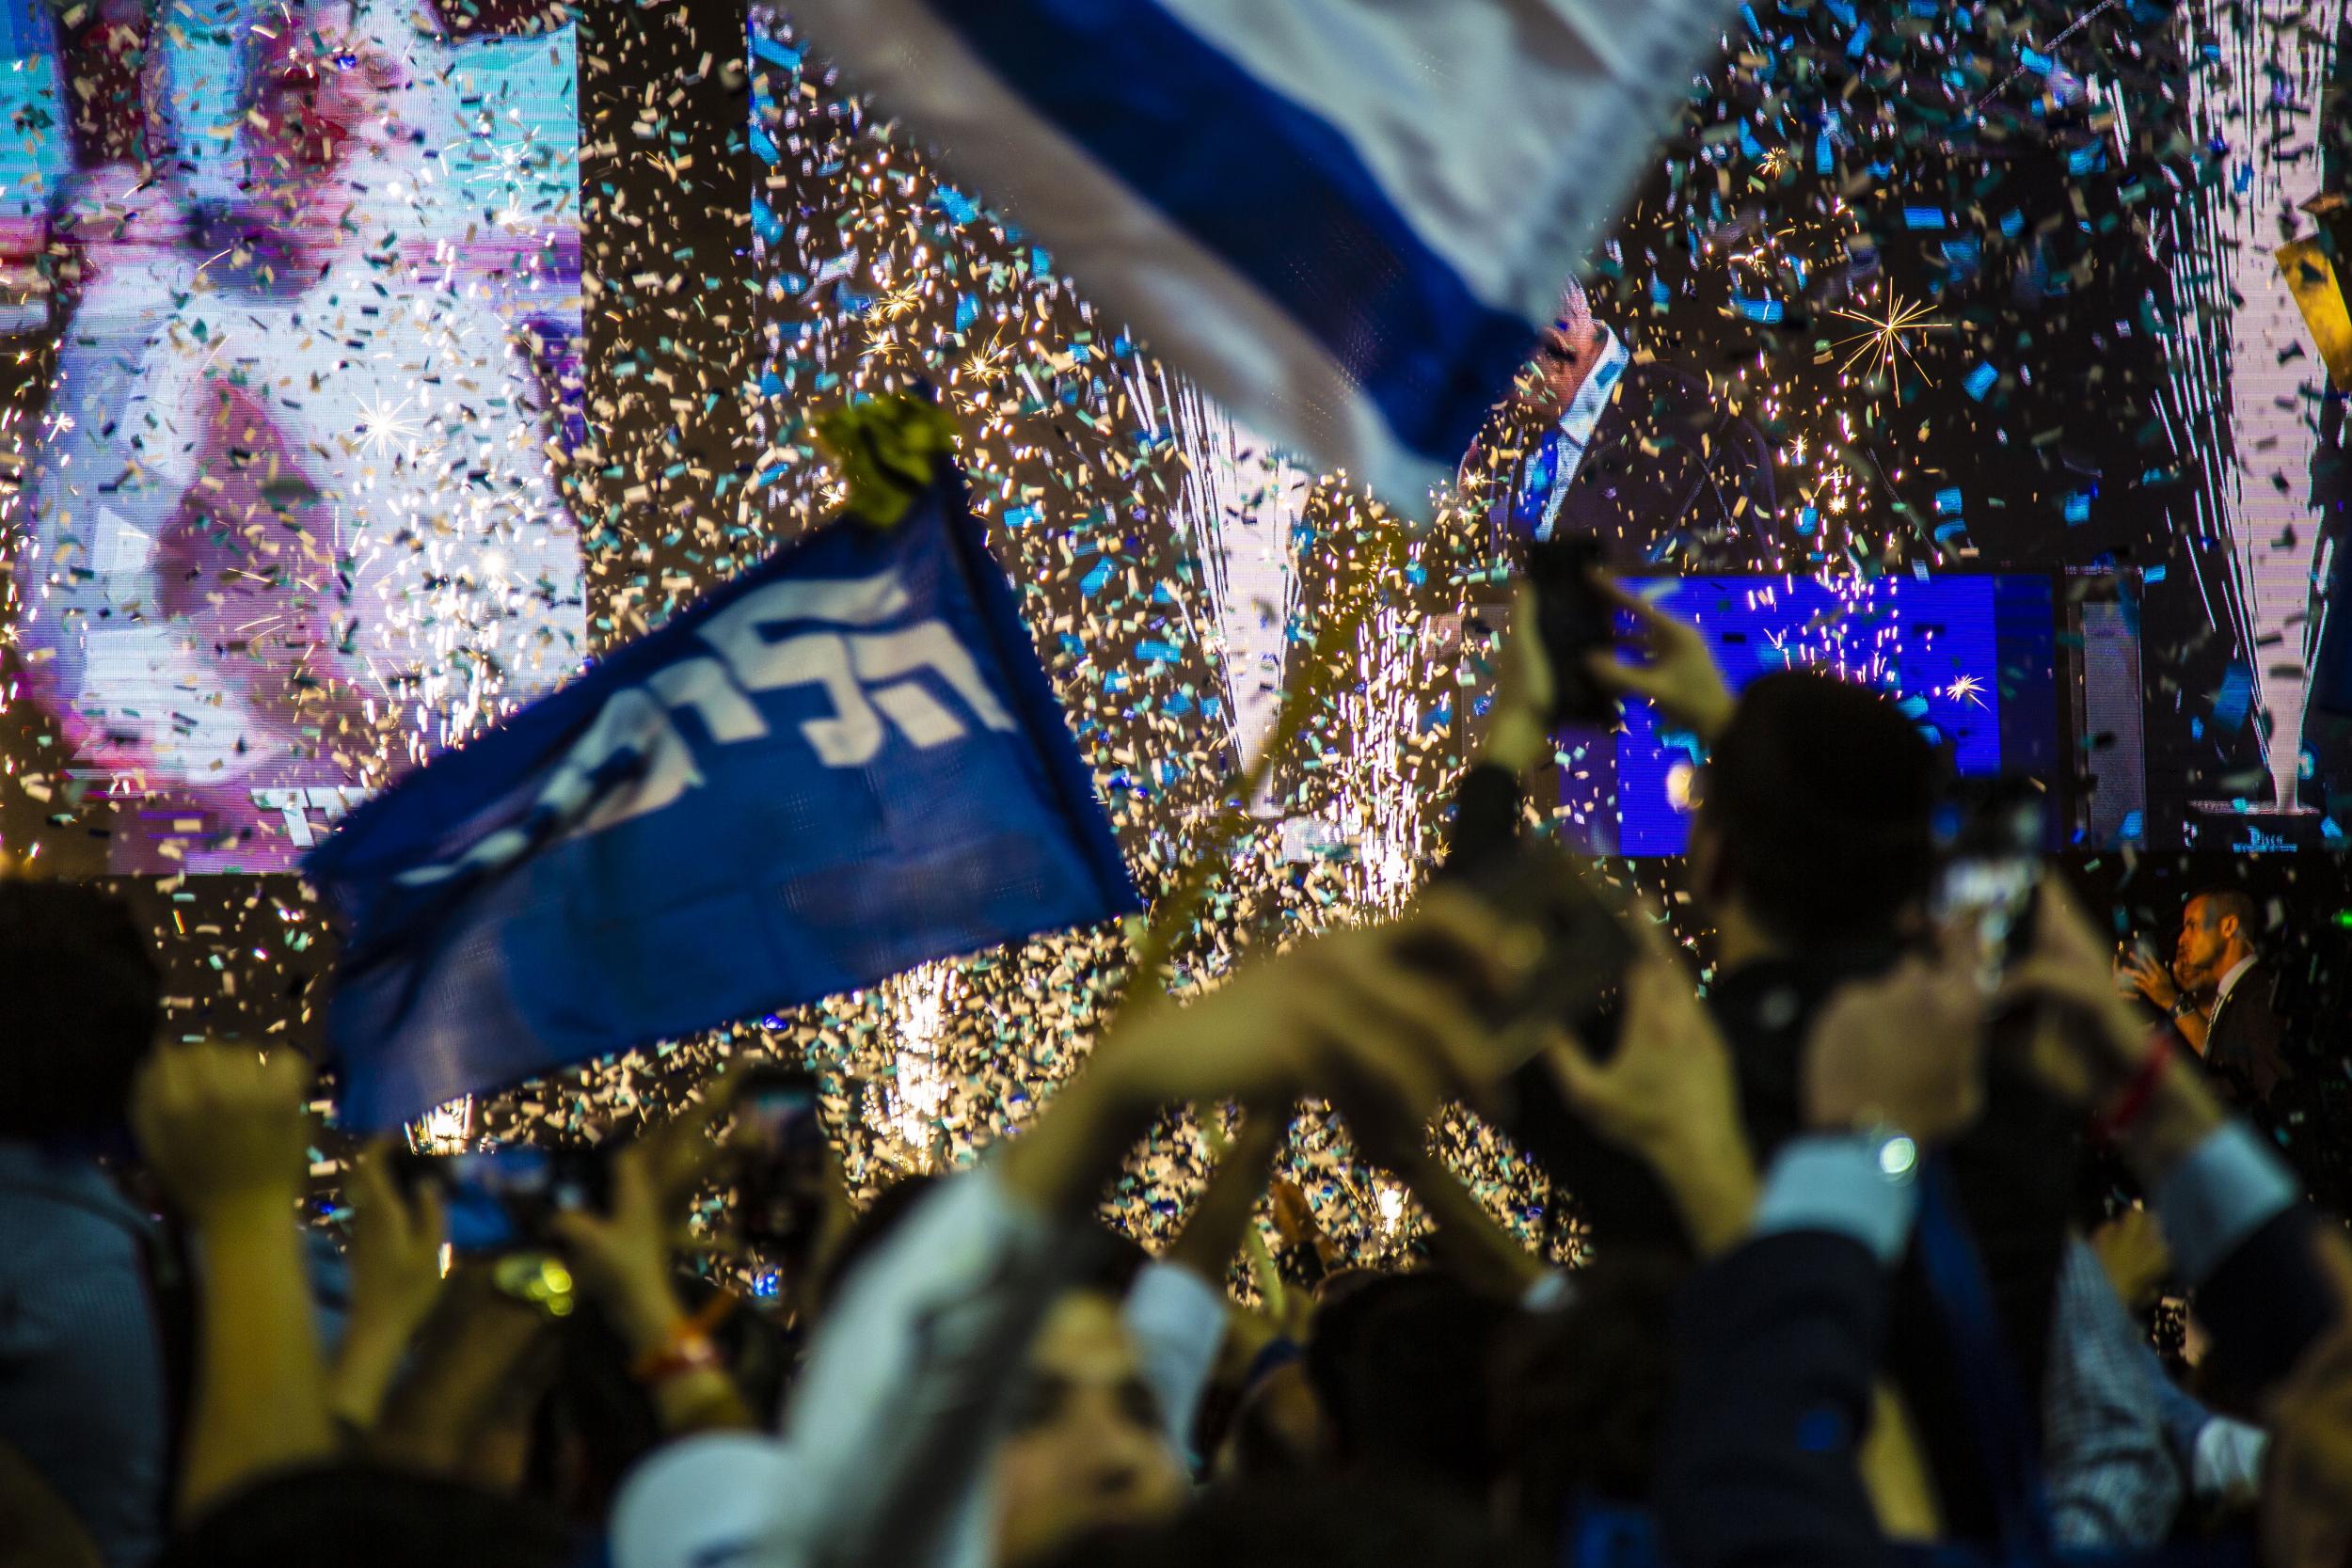 Netanyahu's supporters celebrate what he said was a Likud win at their headquarters in Tel Aviv